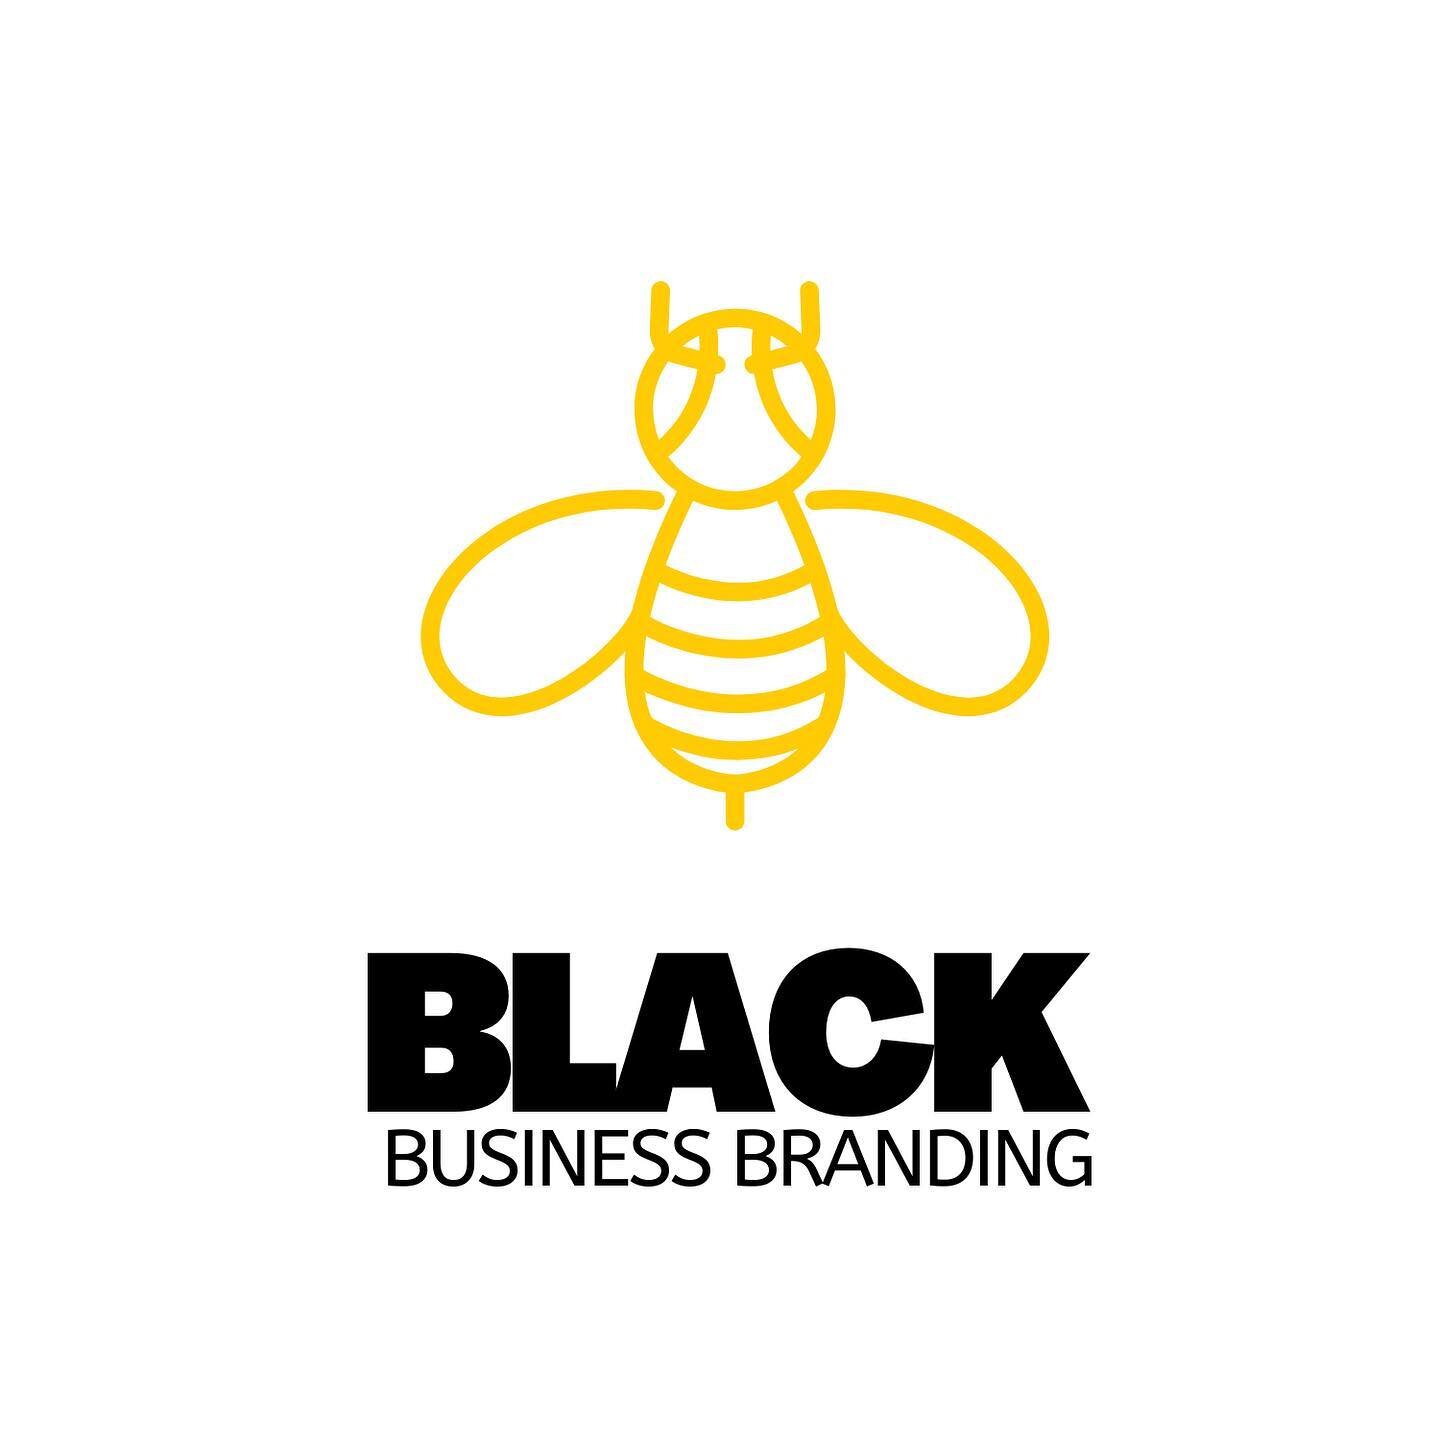 Created to give black business owners and professionals the proper visual aesthetics to enhance their establishments and careers.
.
.

#blackownedbusiness #bob #blackphotographers #blackvideographer #blackgraphicdesigner #urbanprofessionals #brooklyn